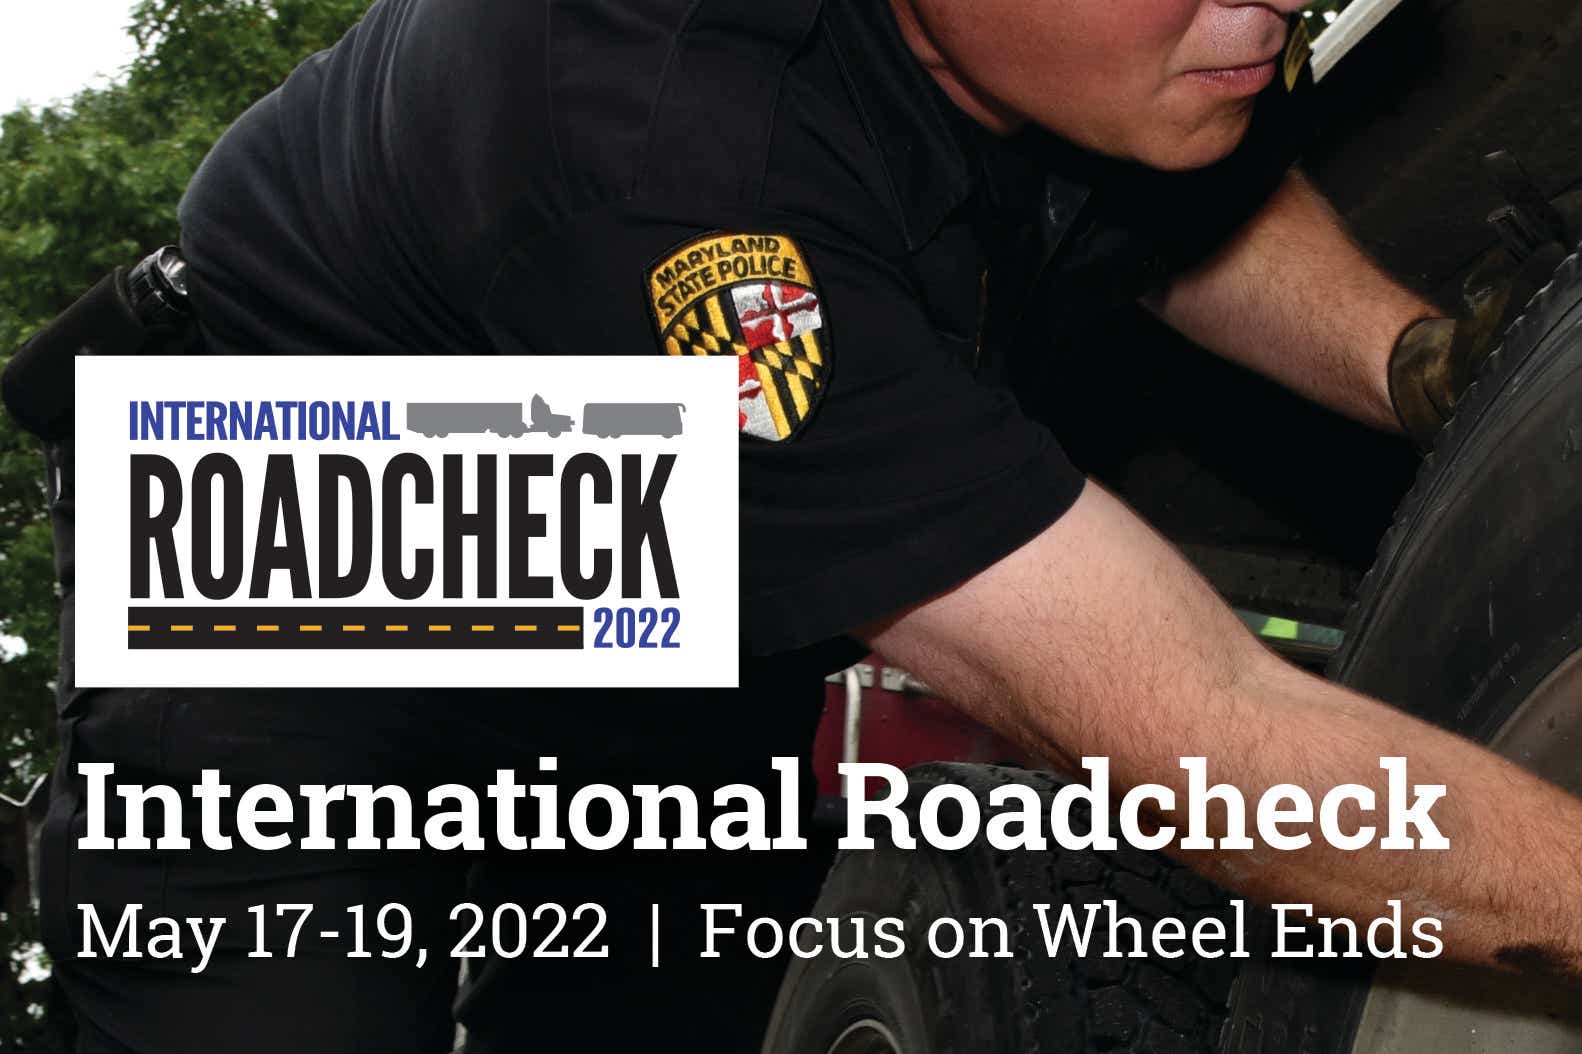 Police searching for international roadcheck